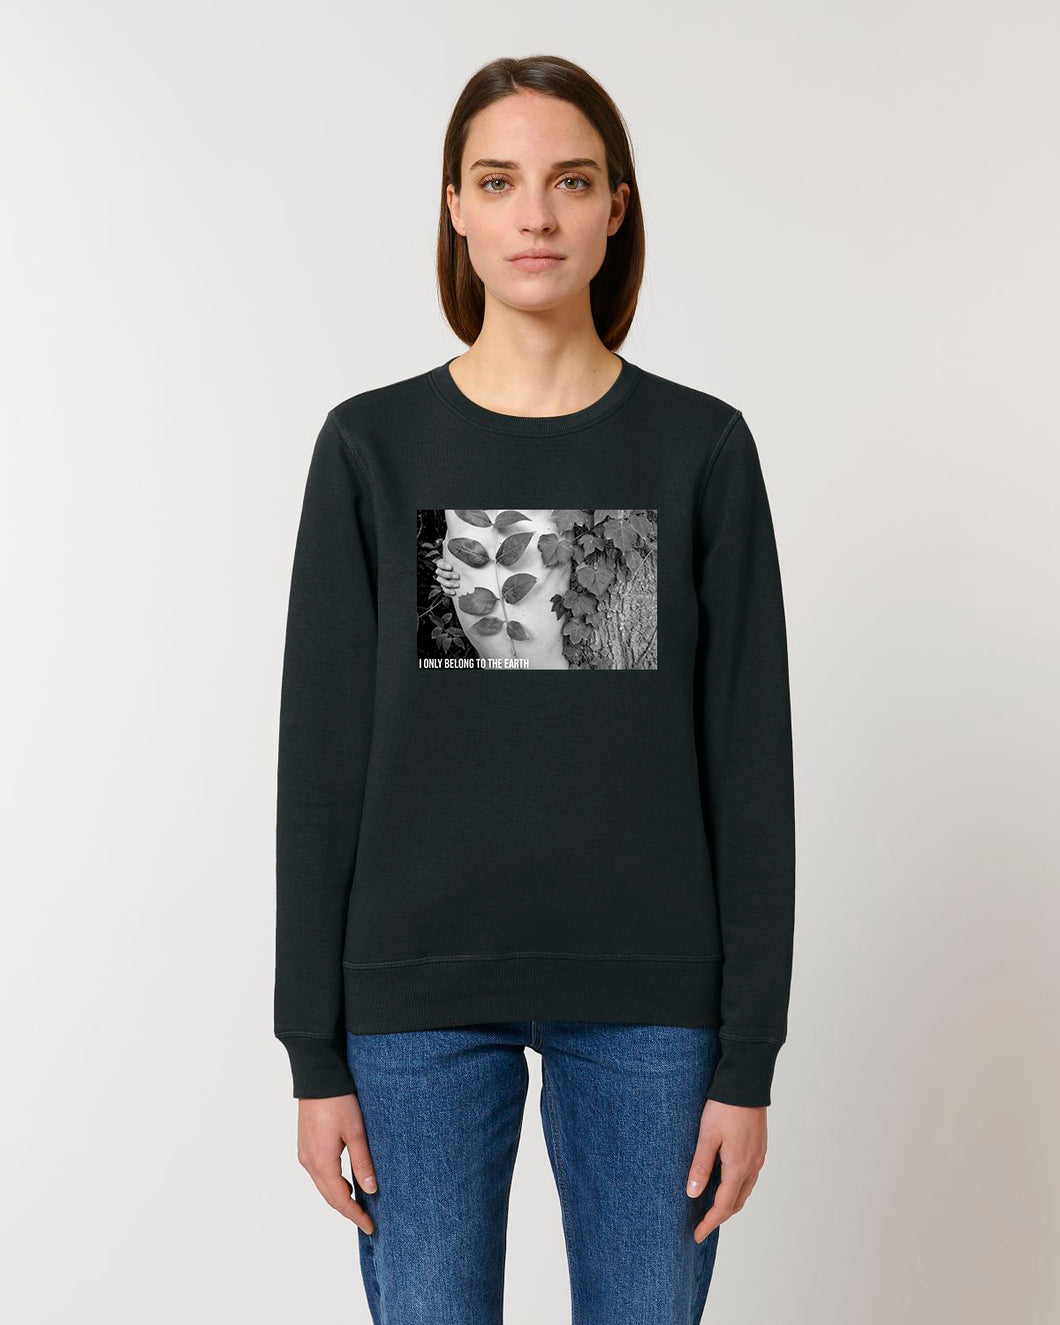 Sudadera Fine Art by Silvia Rocchino - I only belong to The Earth